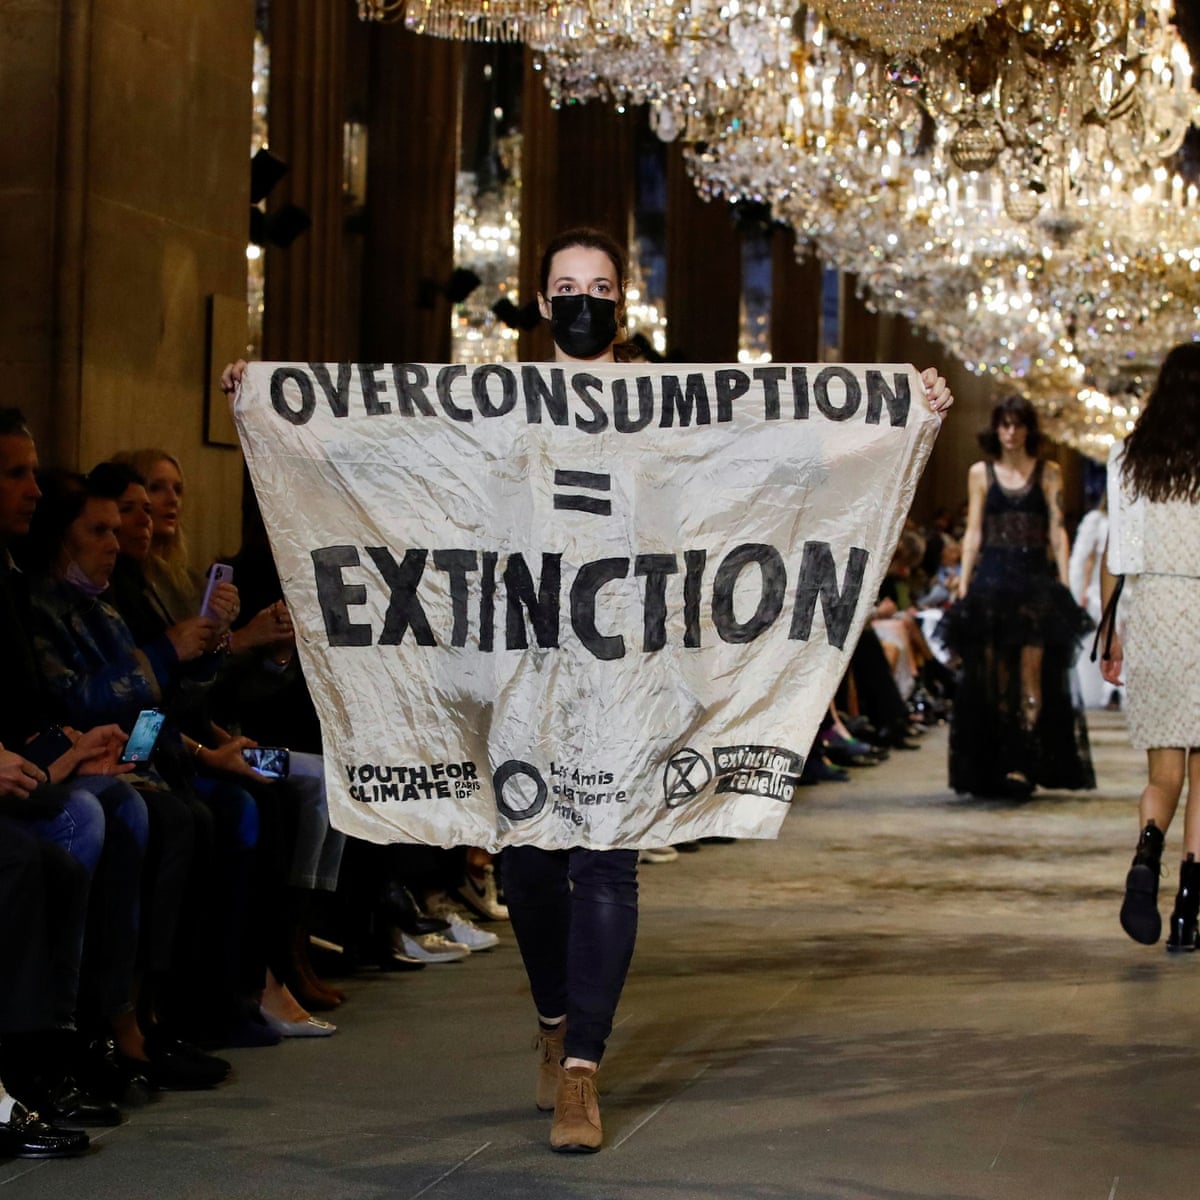 Overconsumption, not overpopulation, is driving the climate crisis | Letters | The Guardian